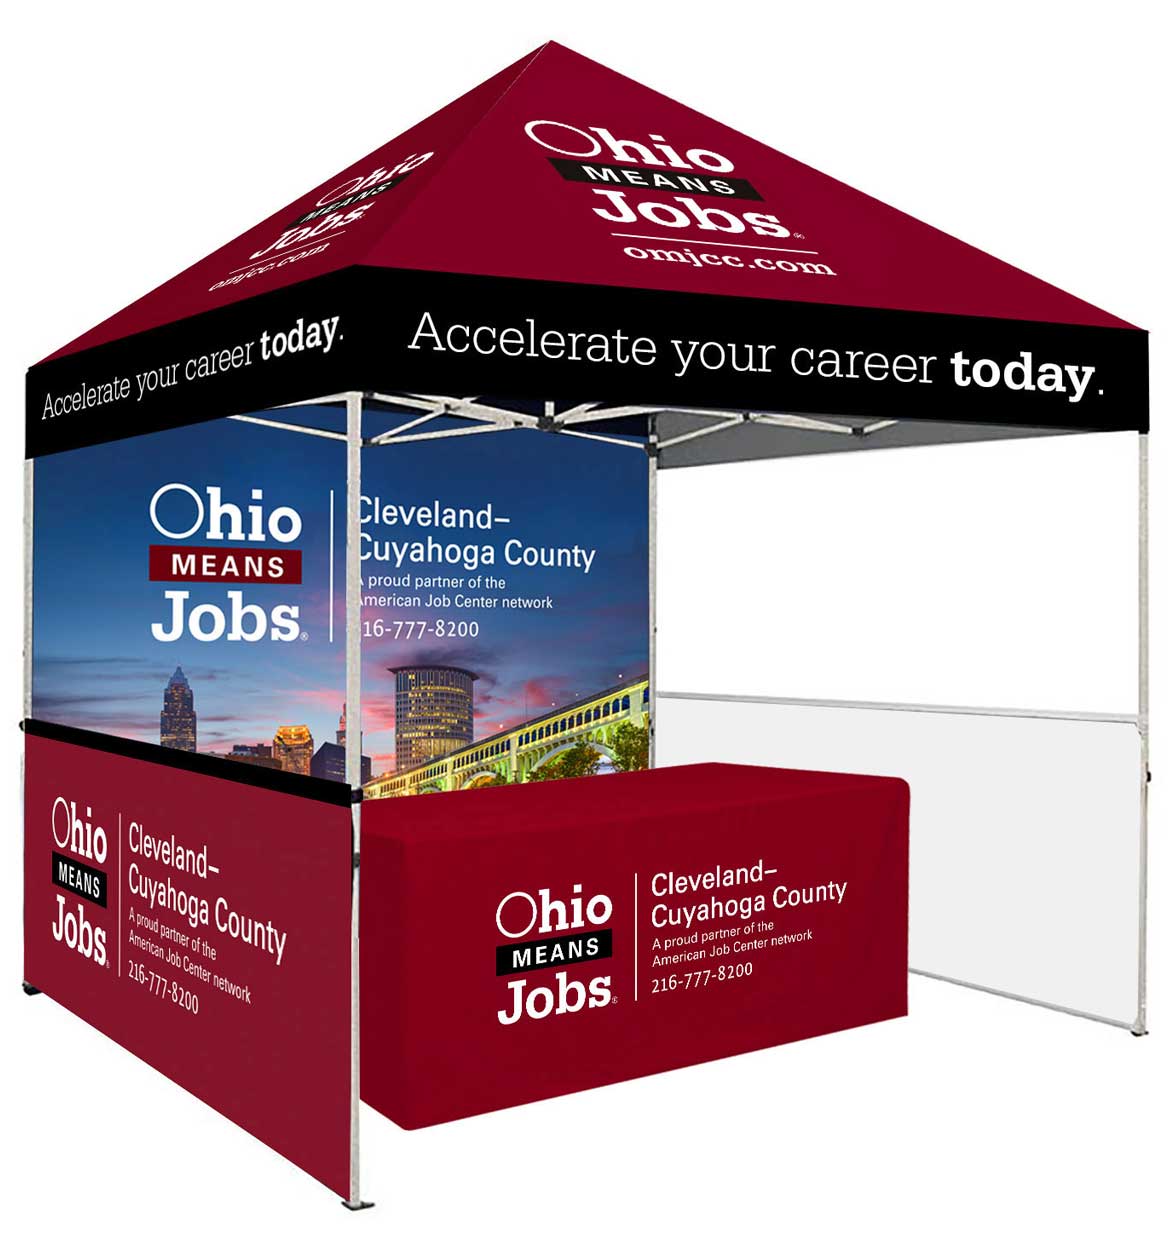 A booth covered in branded graphics for OhioMeansJobs.